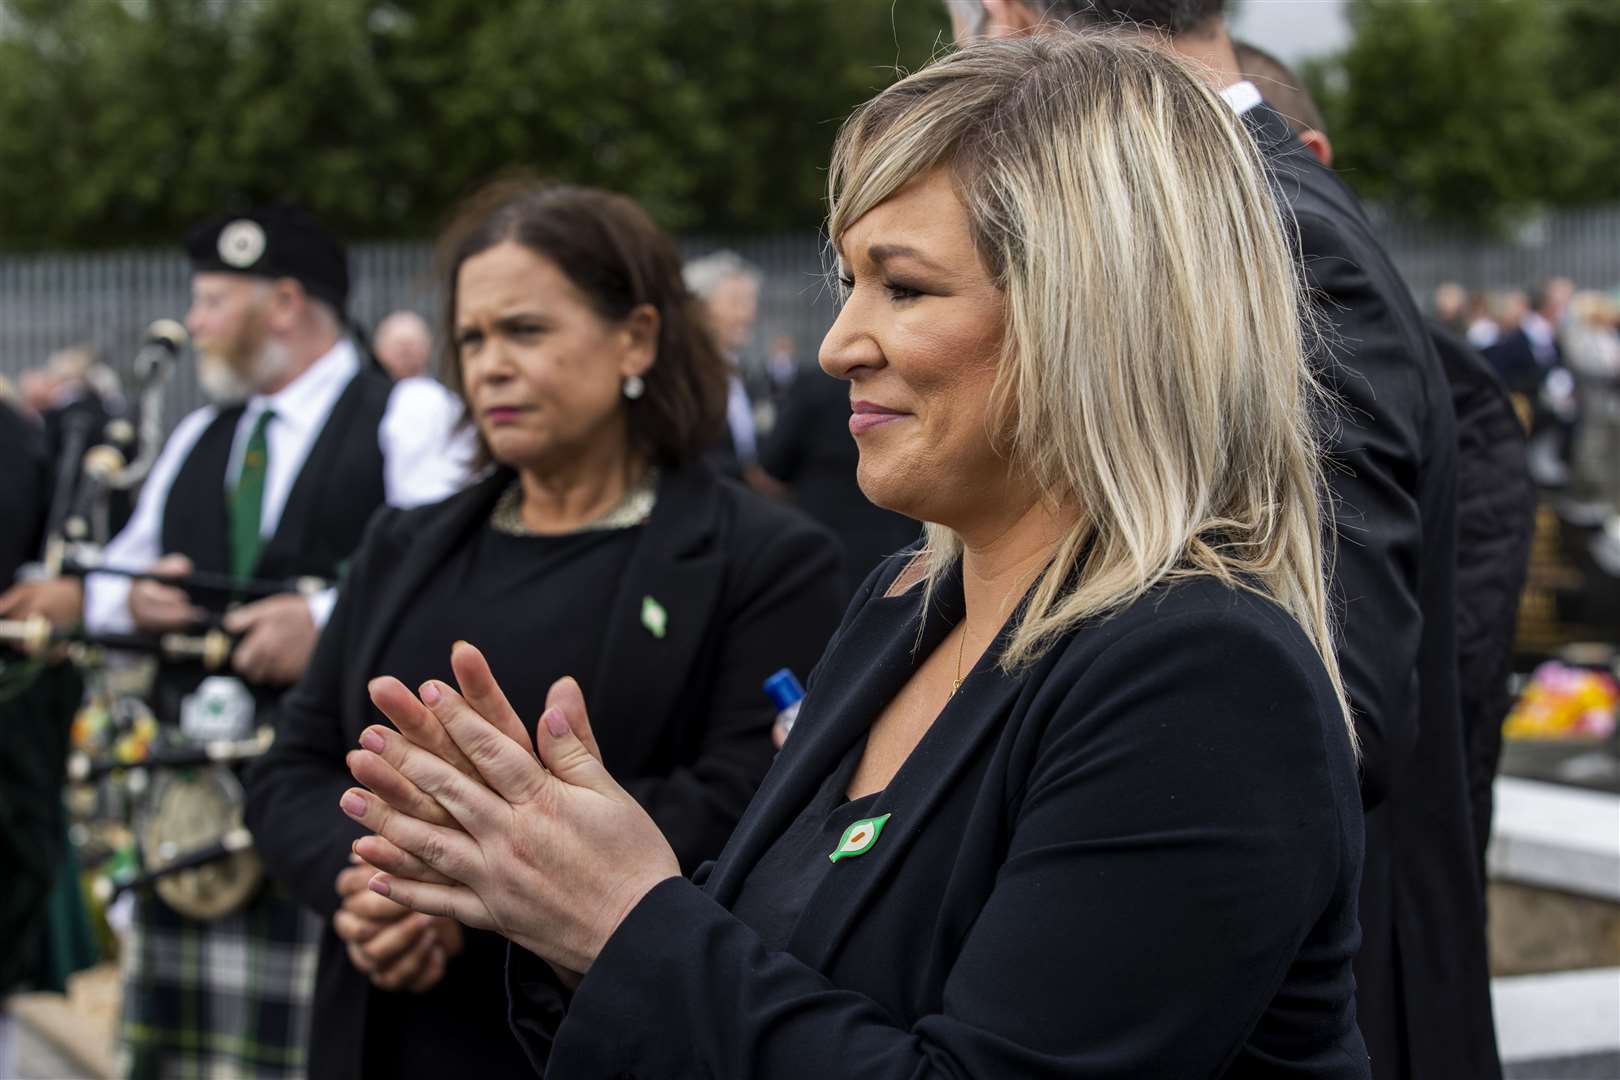 Sinn Fein leader Mary Lou McDonald and Michelle O’Neill during the funeral (Liam McBurney/PA)